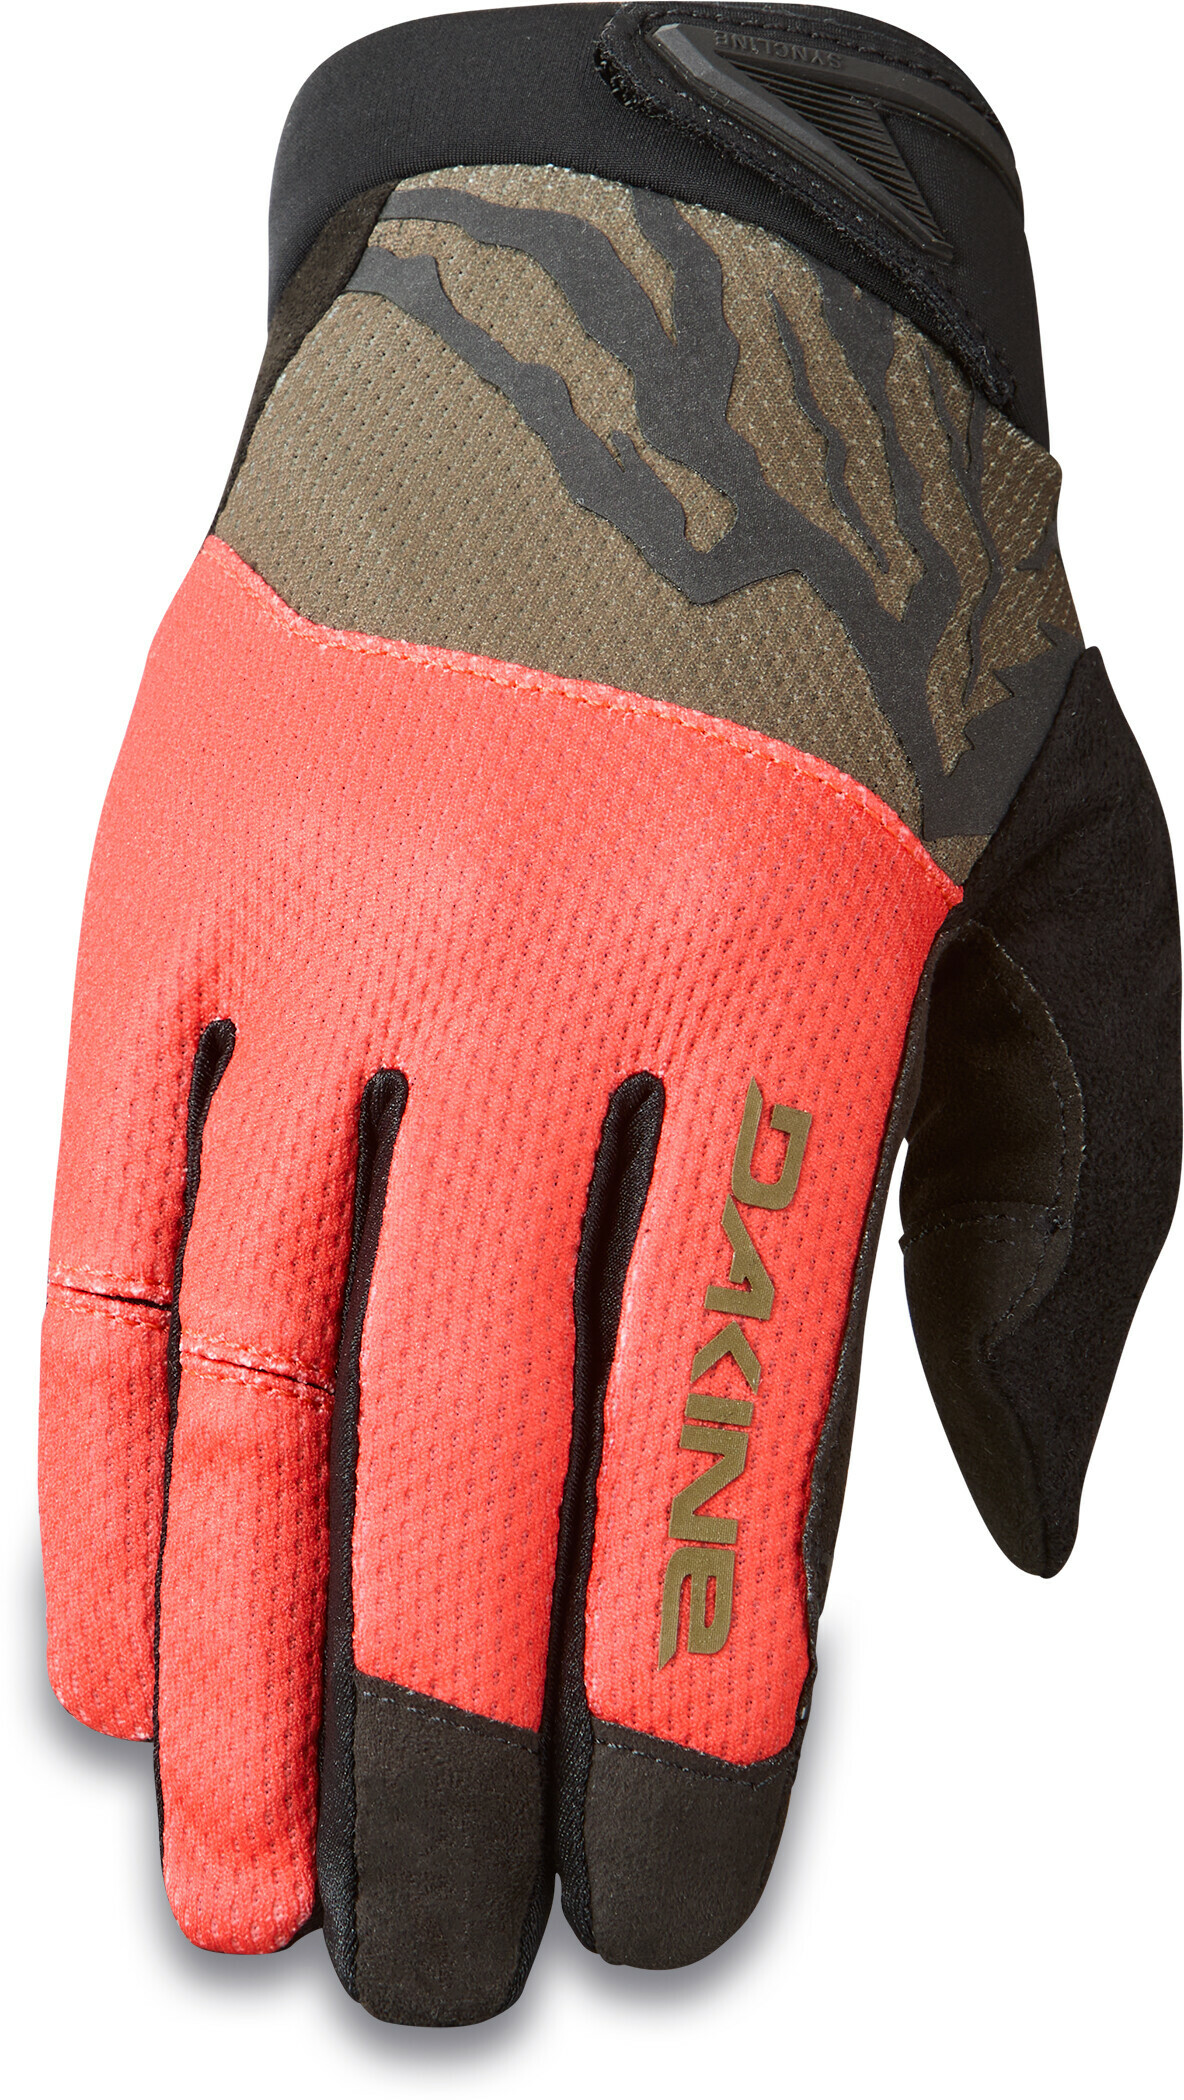 SYNCLINE GLOVE